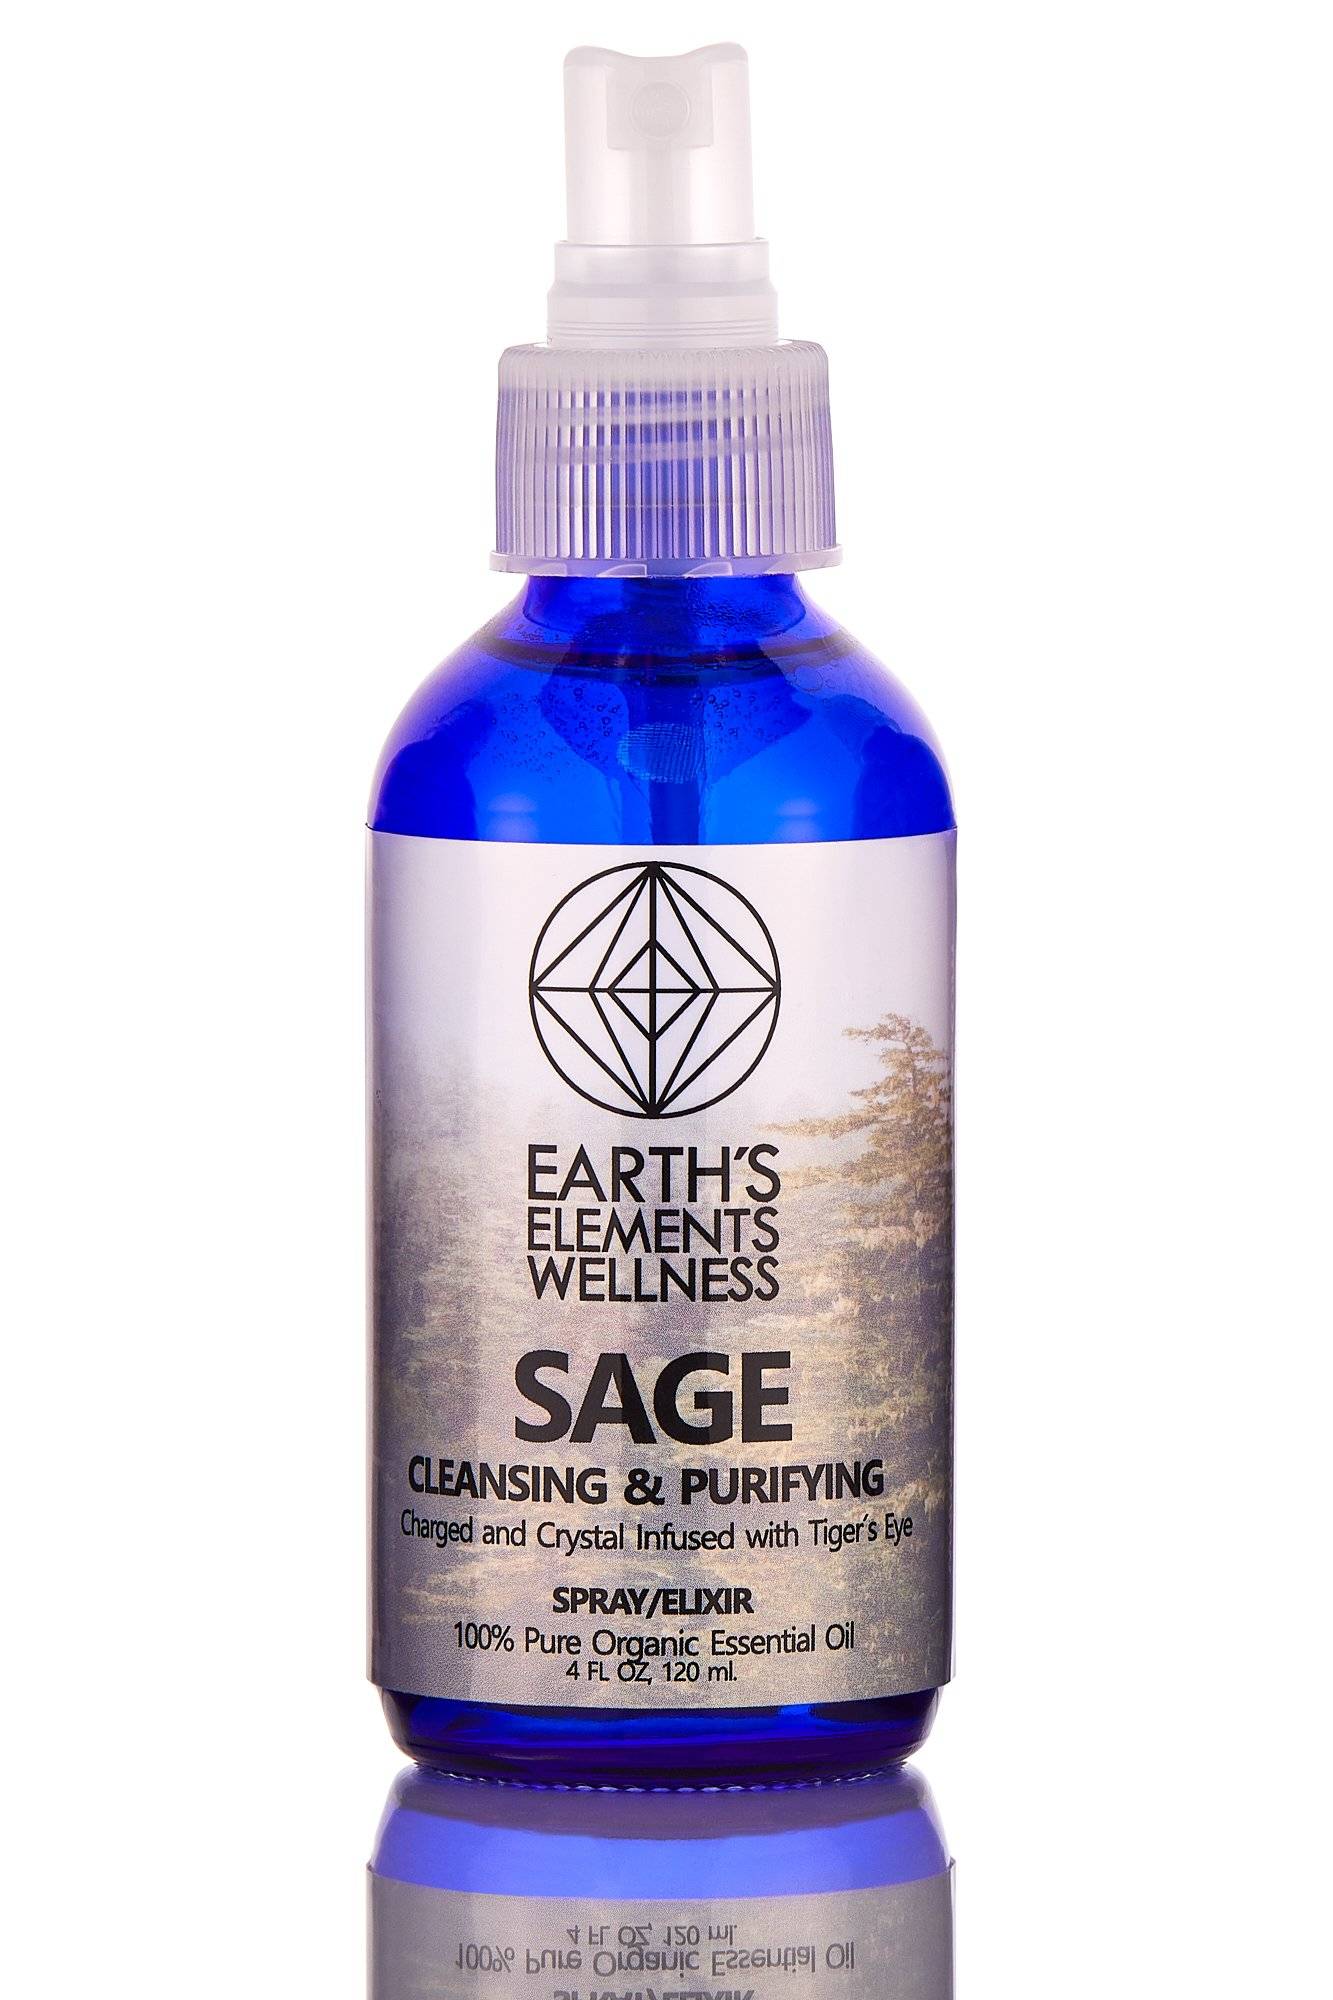 SAGE: Charged and Crystal Infused with Tiger’s Eye